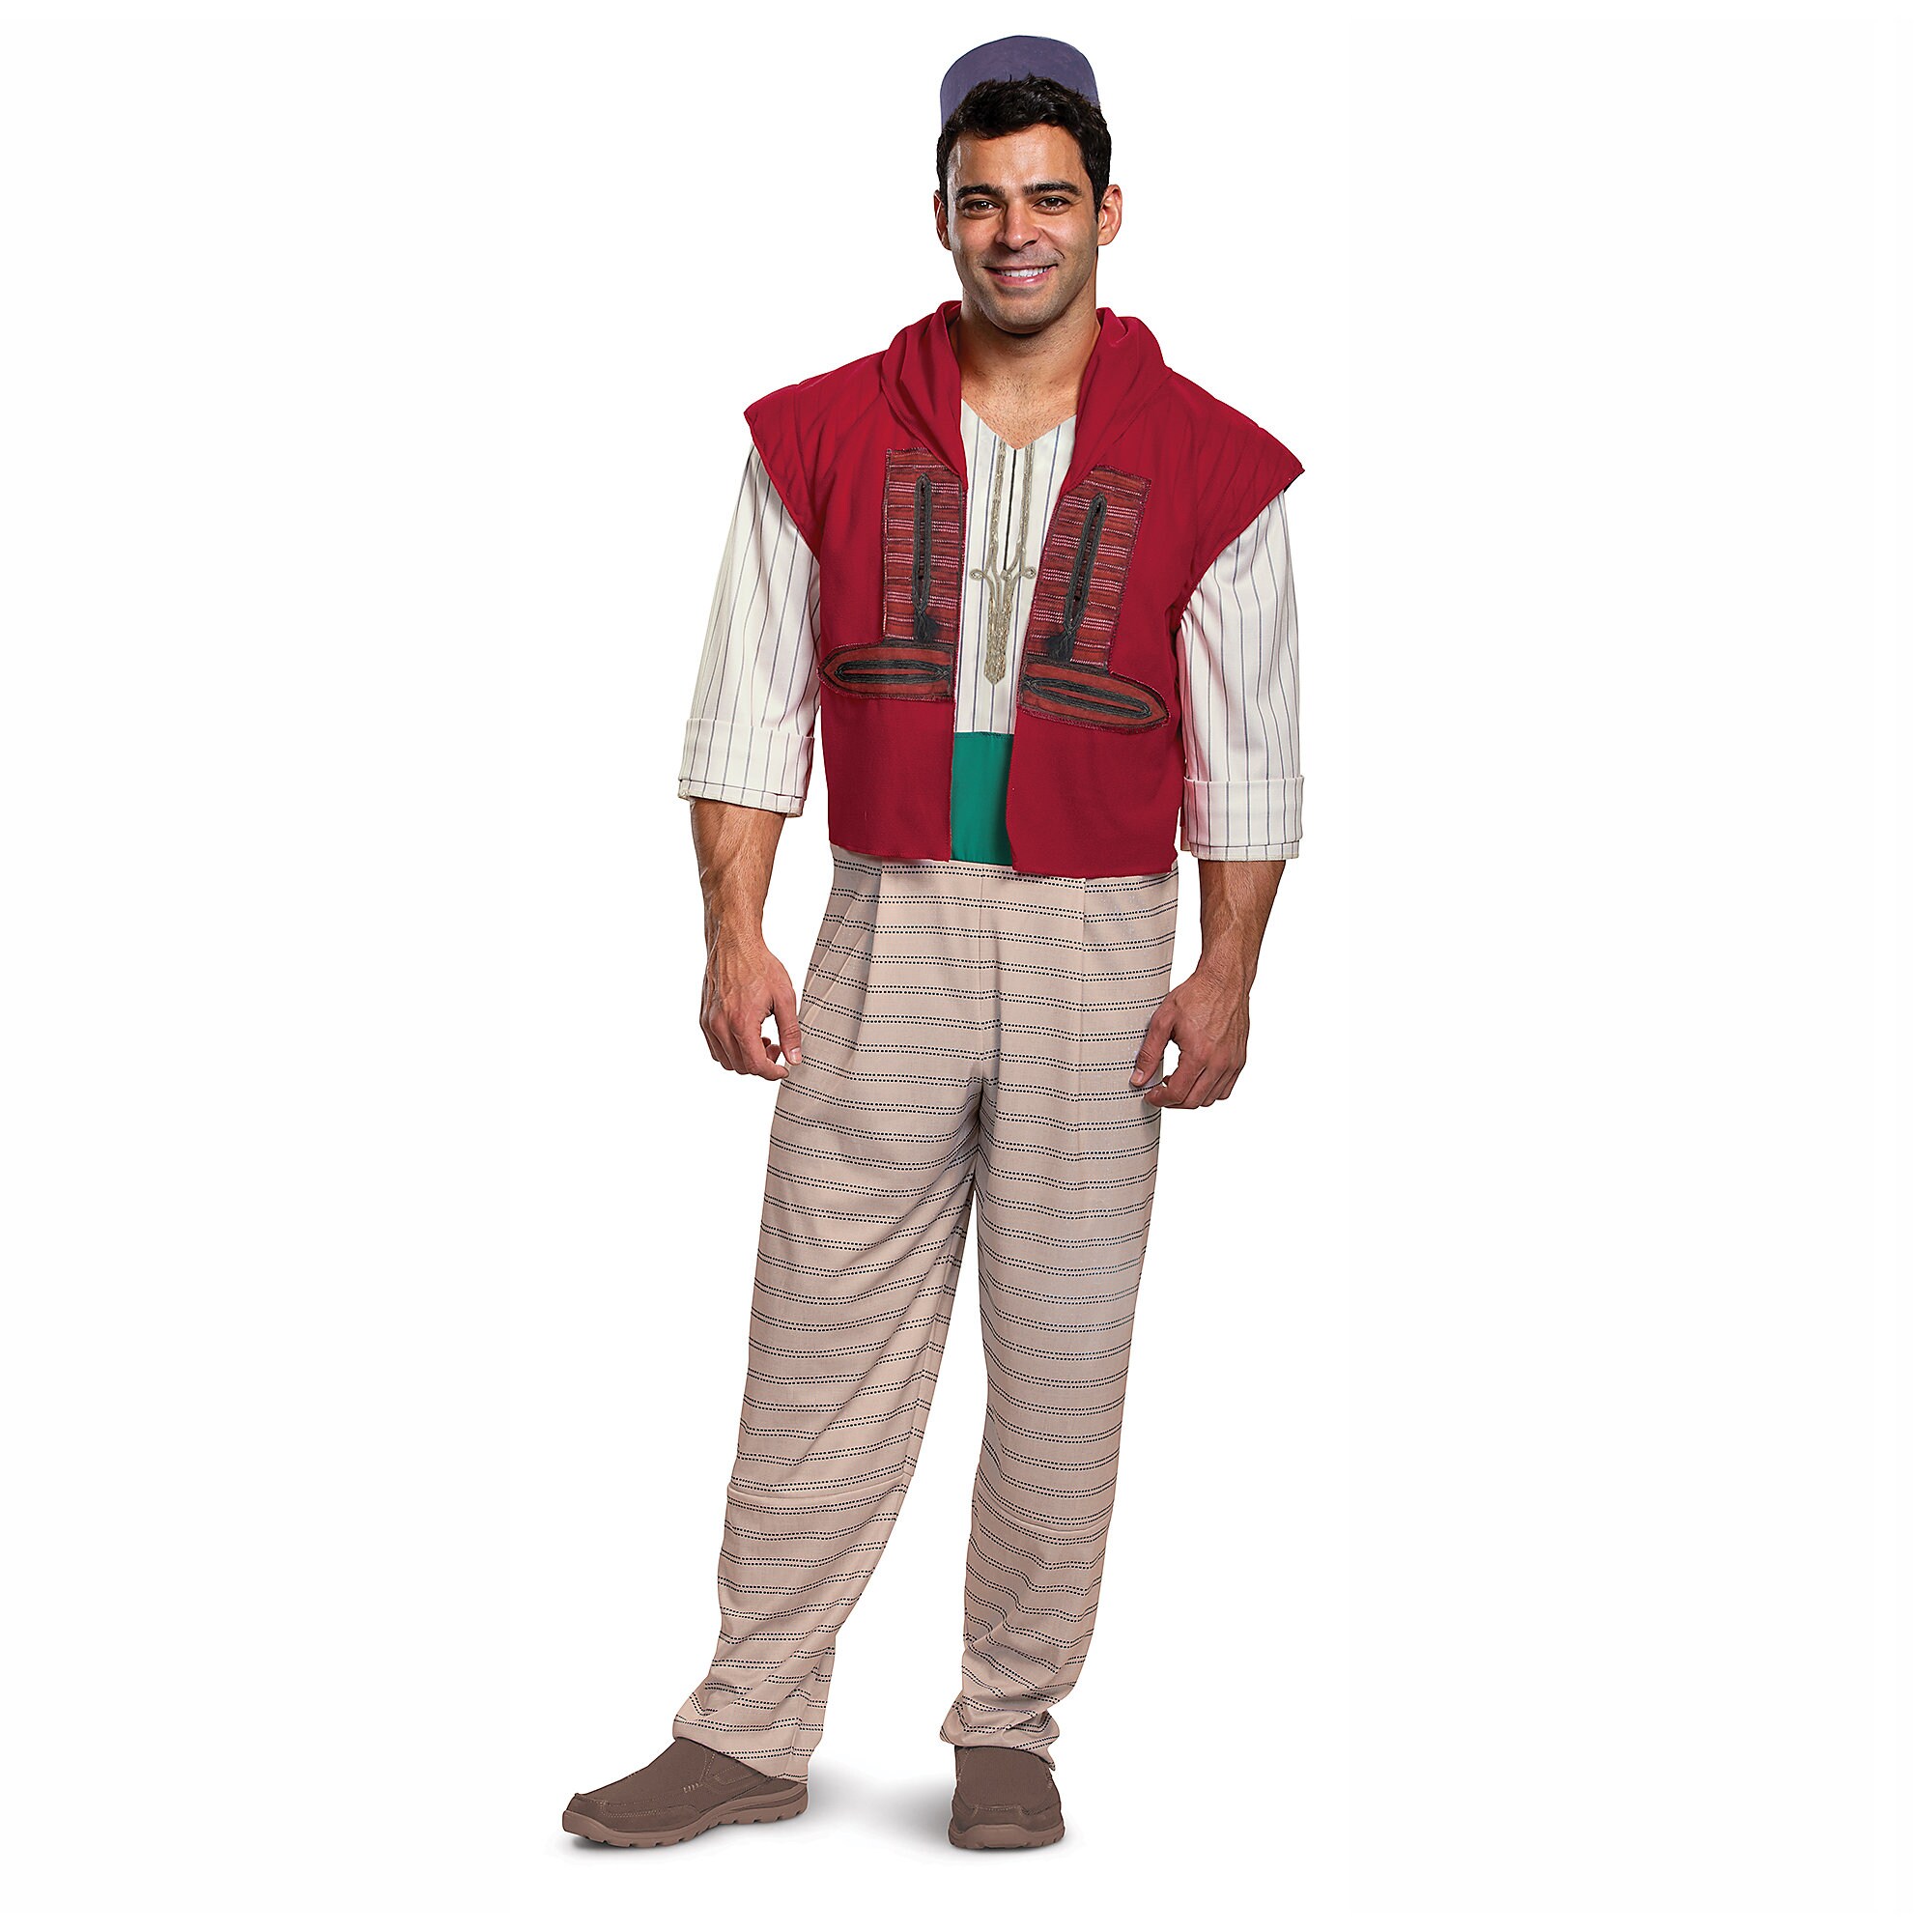 Aladdin Deluxe Costume for Adults by Disguise - Live Action Film